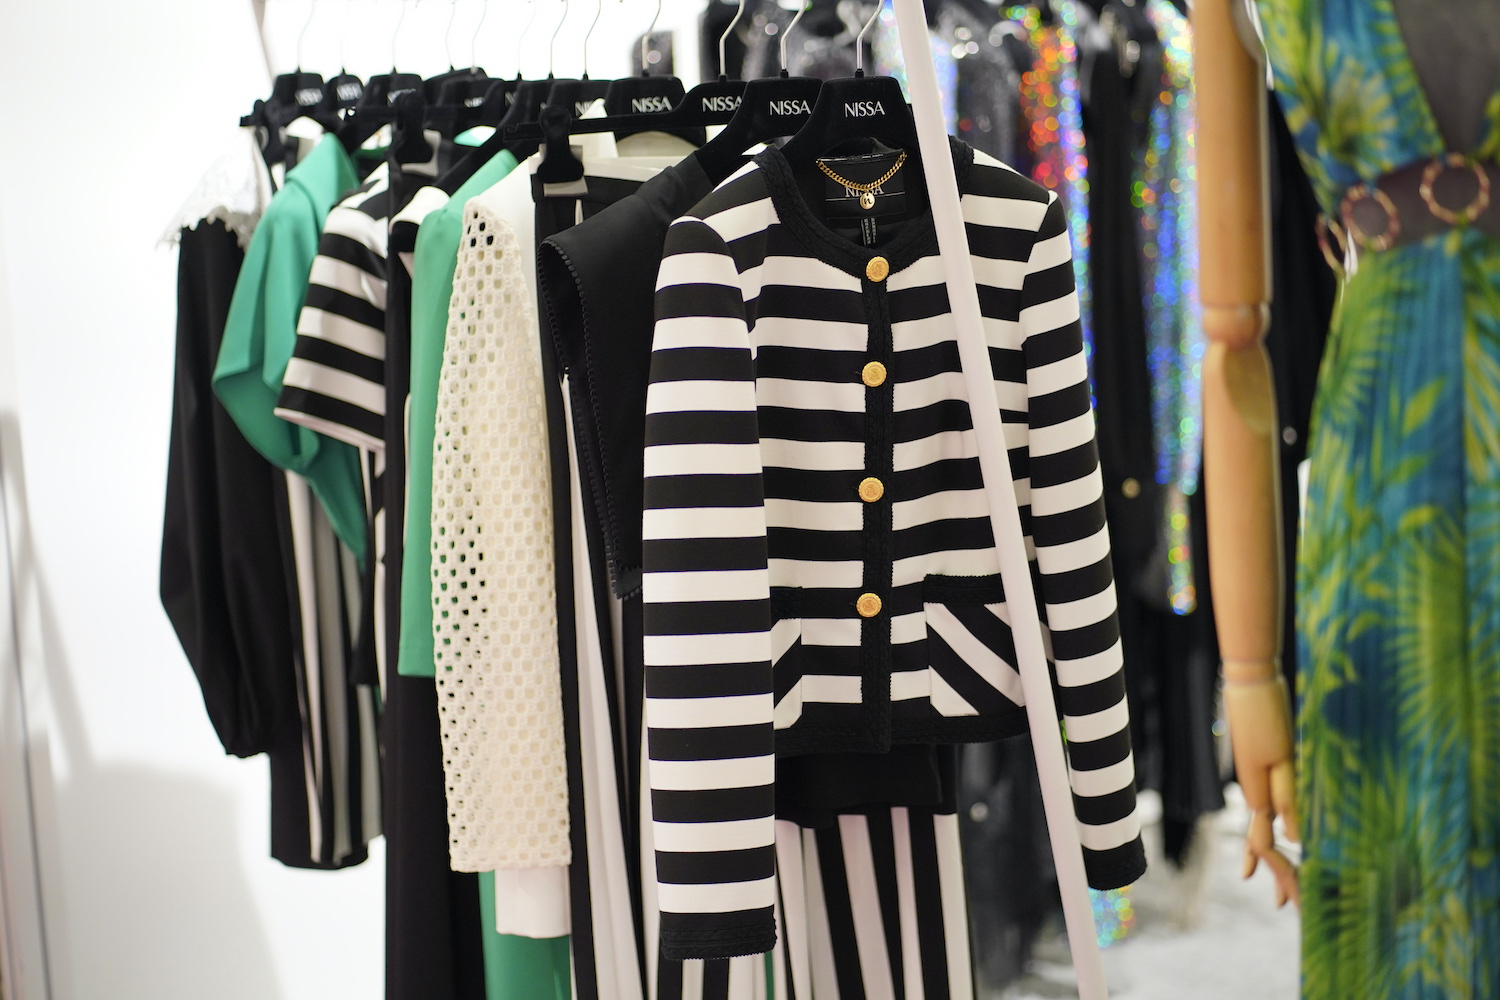 Knitwear on display - thicker yarns, black and white stripes. decorative stitches and accessories. © Première Vision